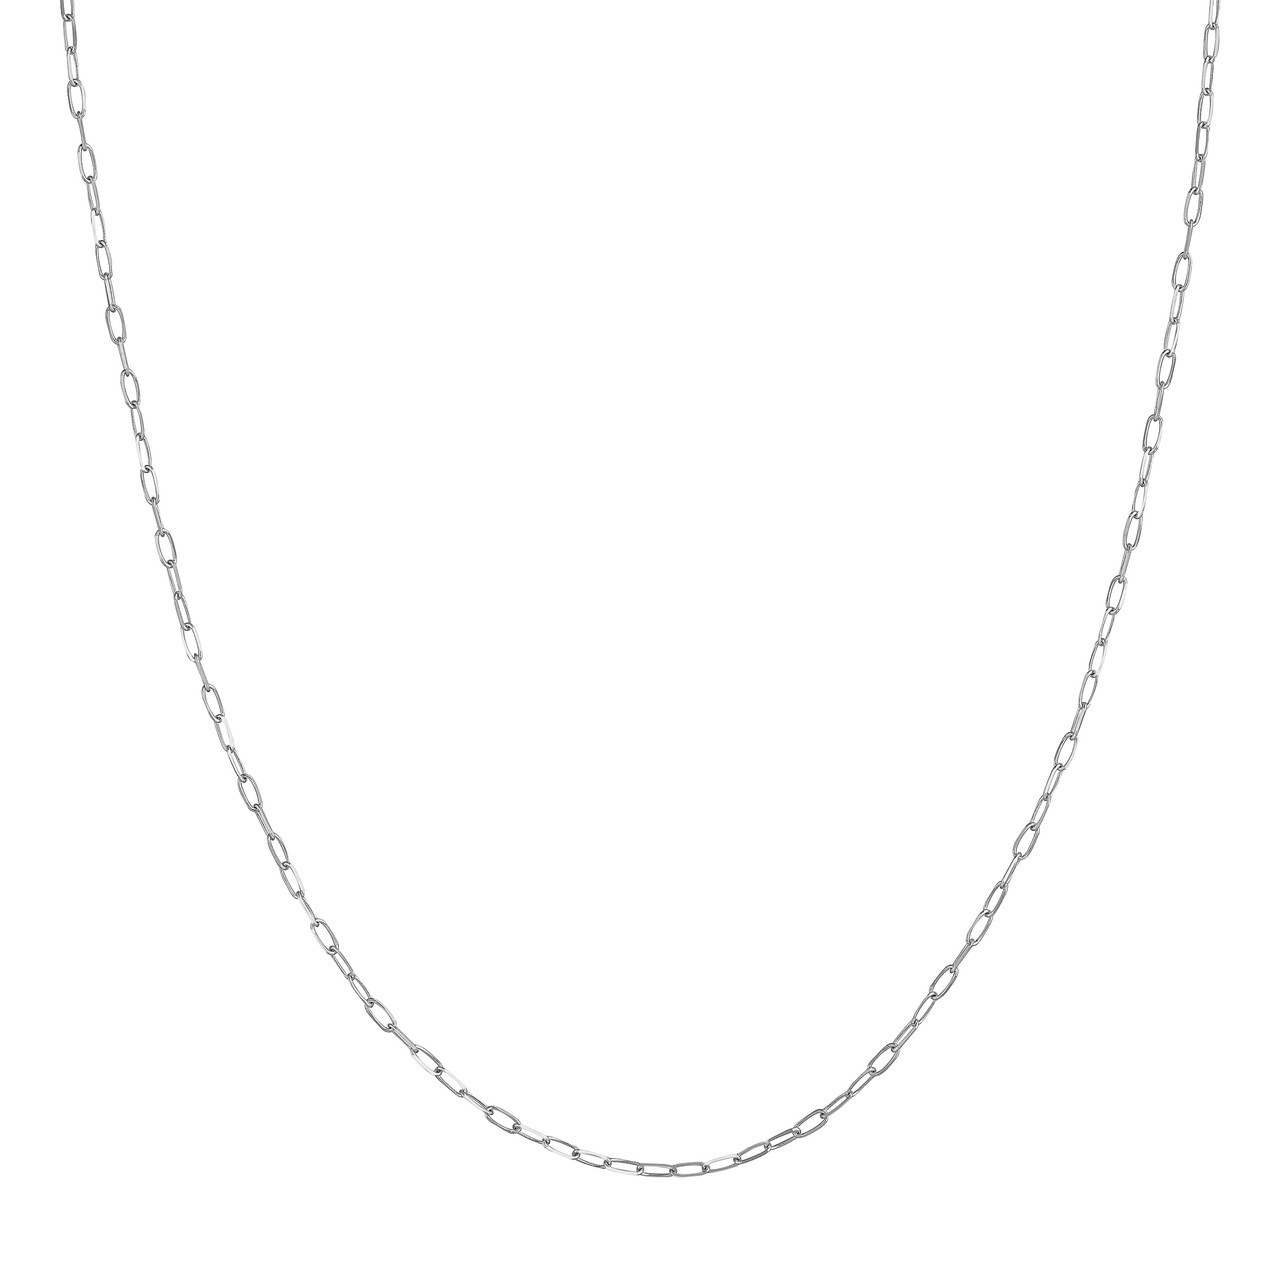 White Gold Solid Petite1.7mm Paperclip Chain l 16 inches